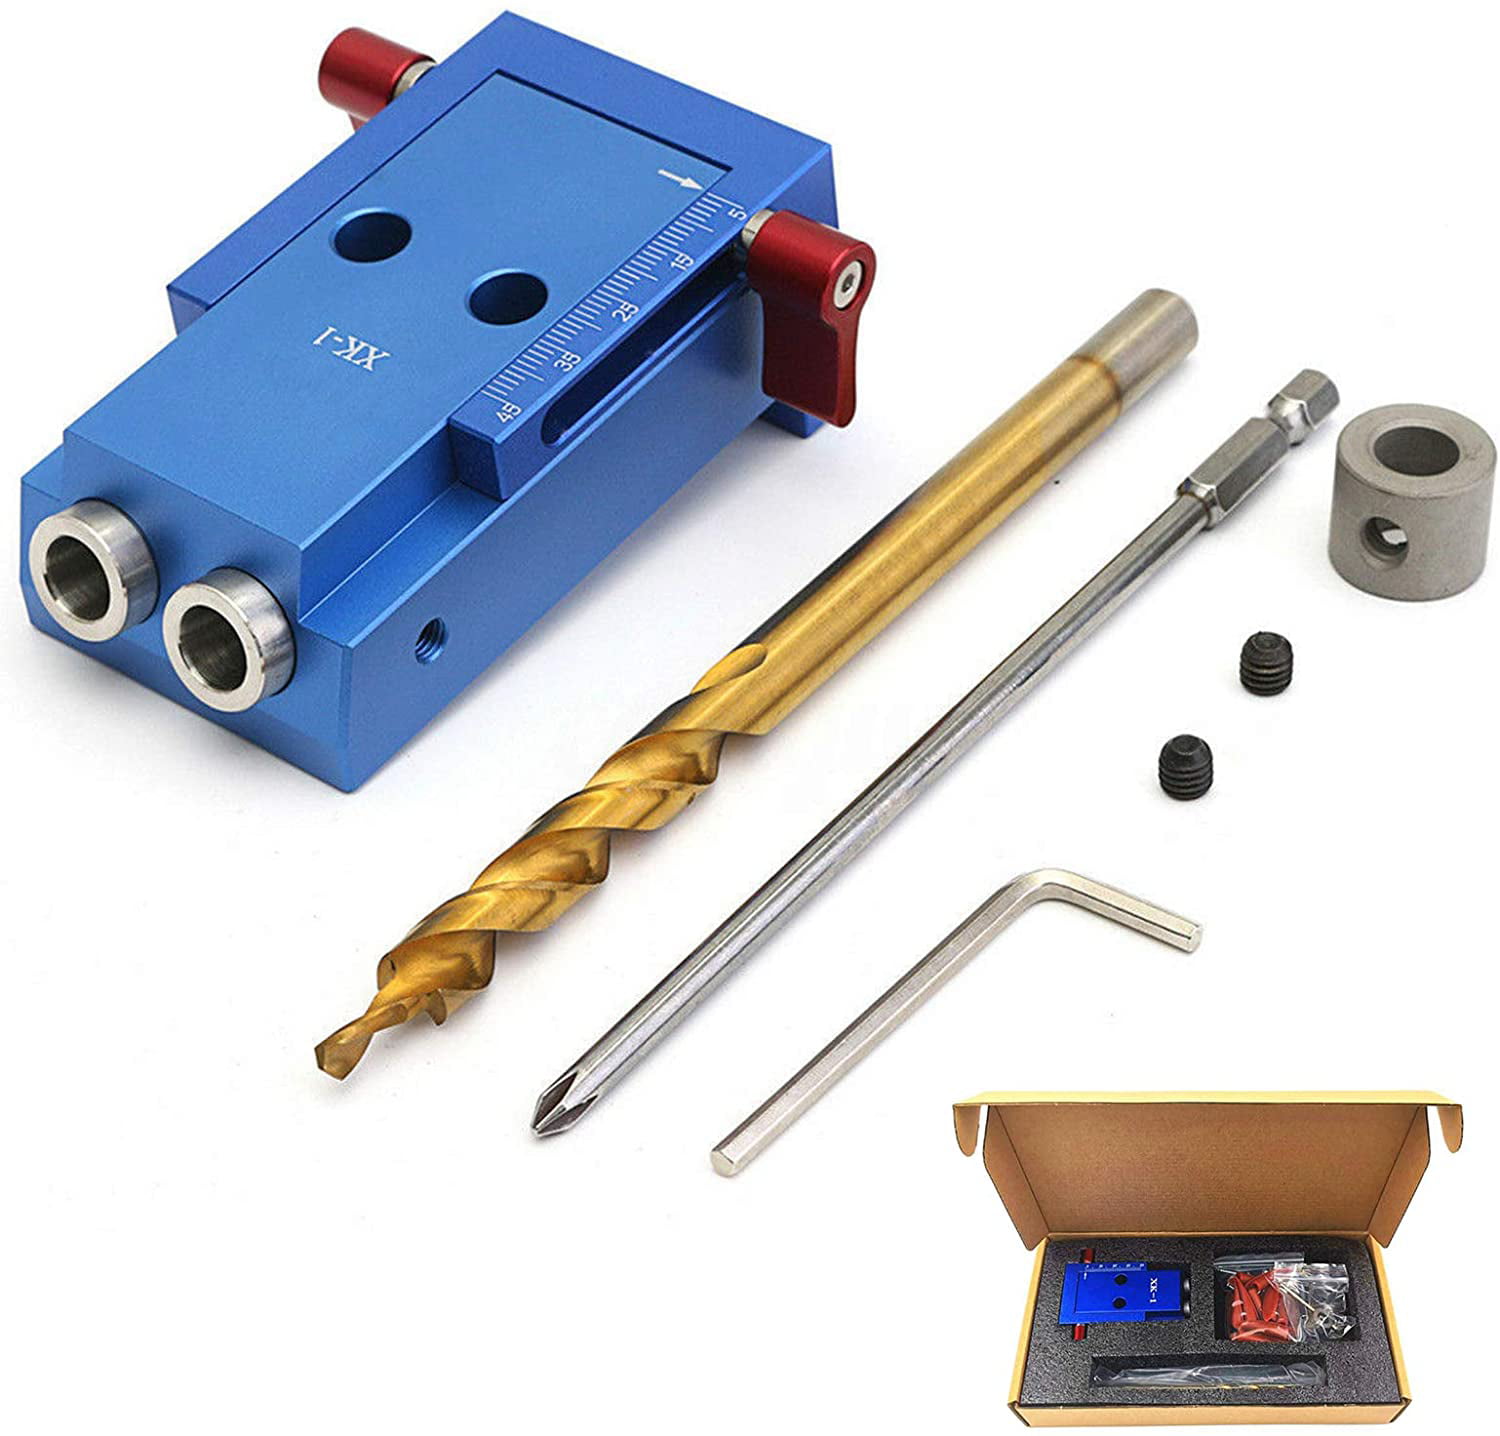 Details about   39 Pcs Pocket Hole Screw Jig Dowel Carpenters W/ 6 8 10mm Hole For Woodworking